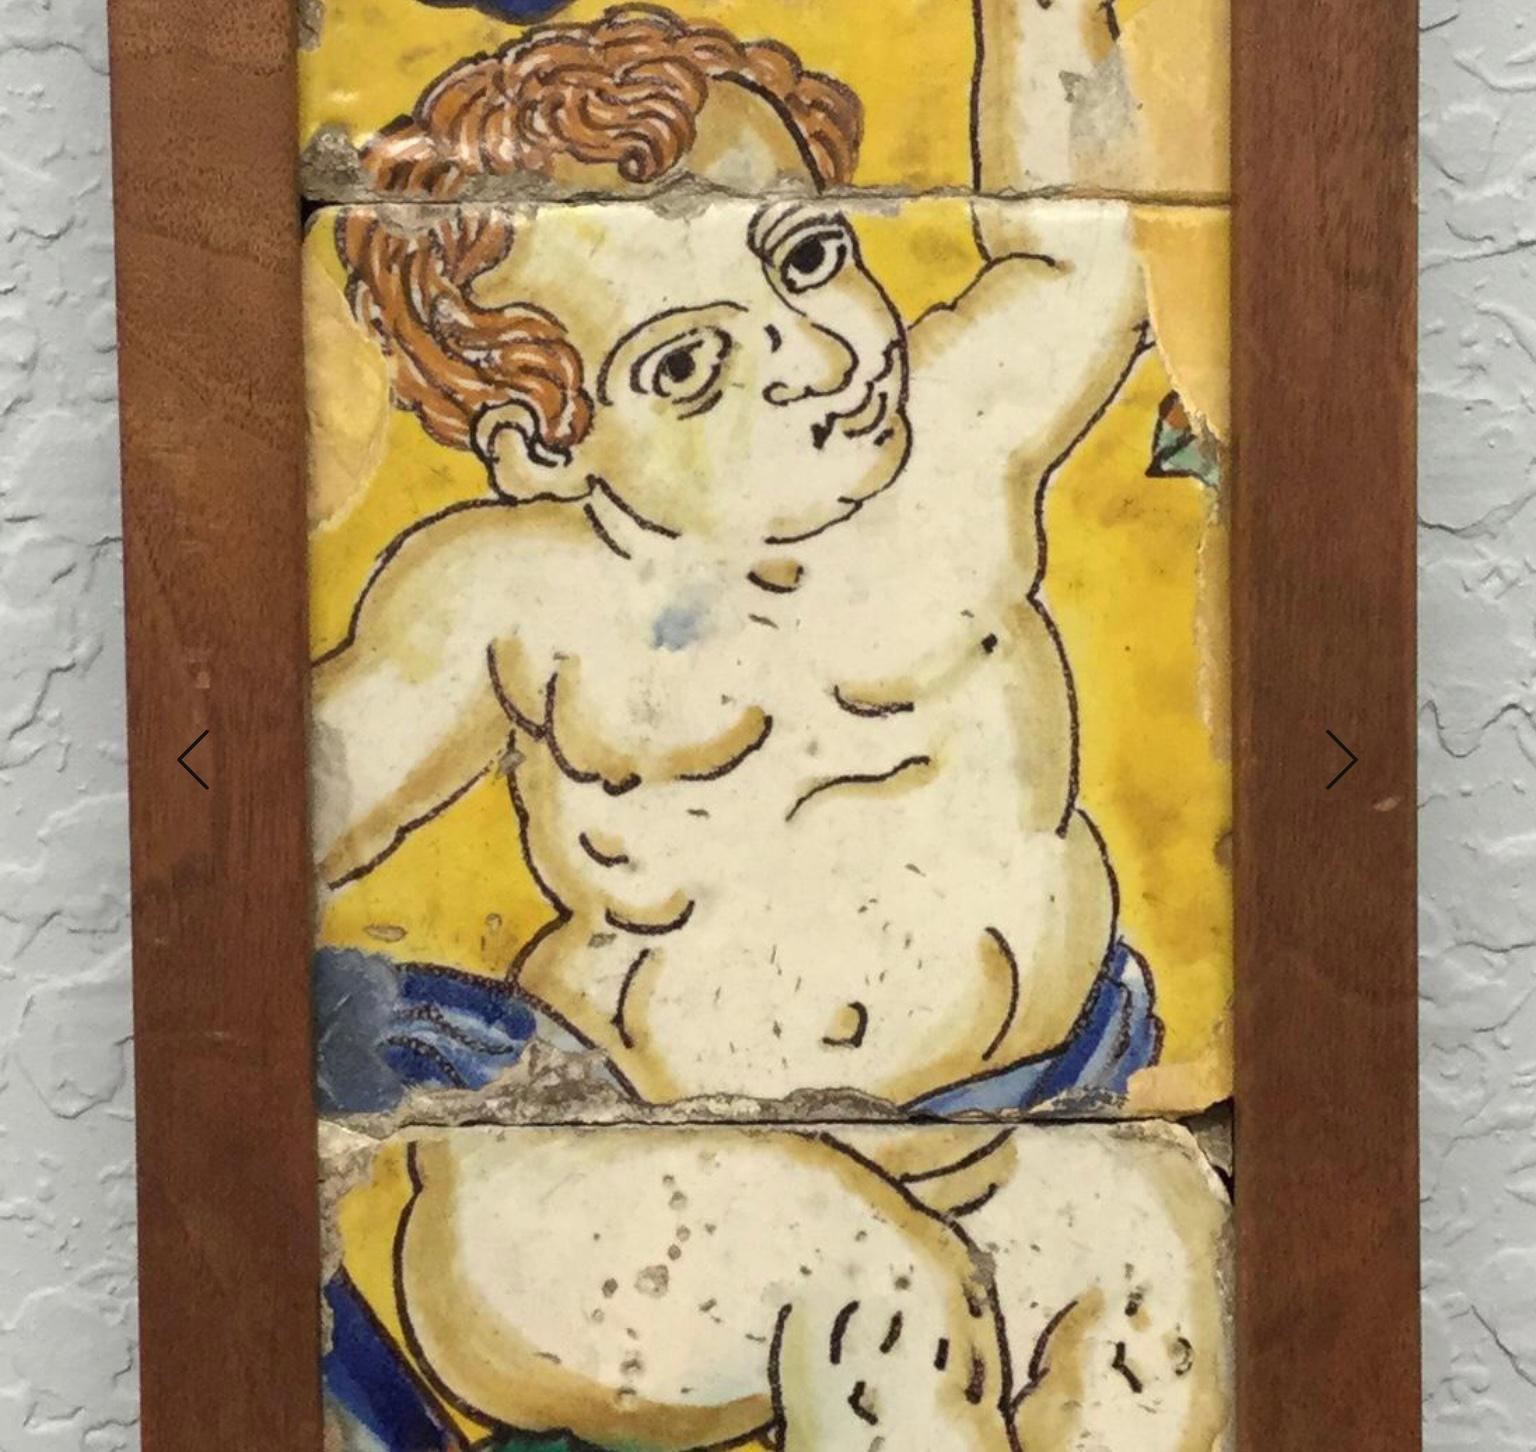 Wonderful rare 18th century Italian Faience Maiolica framed tiles. Bright, vivid and colorful framed tiles depicting a chubby putto or cherub sitting on a branch petting the head of a bird. Great early decorative accessory that will add an old world